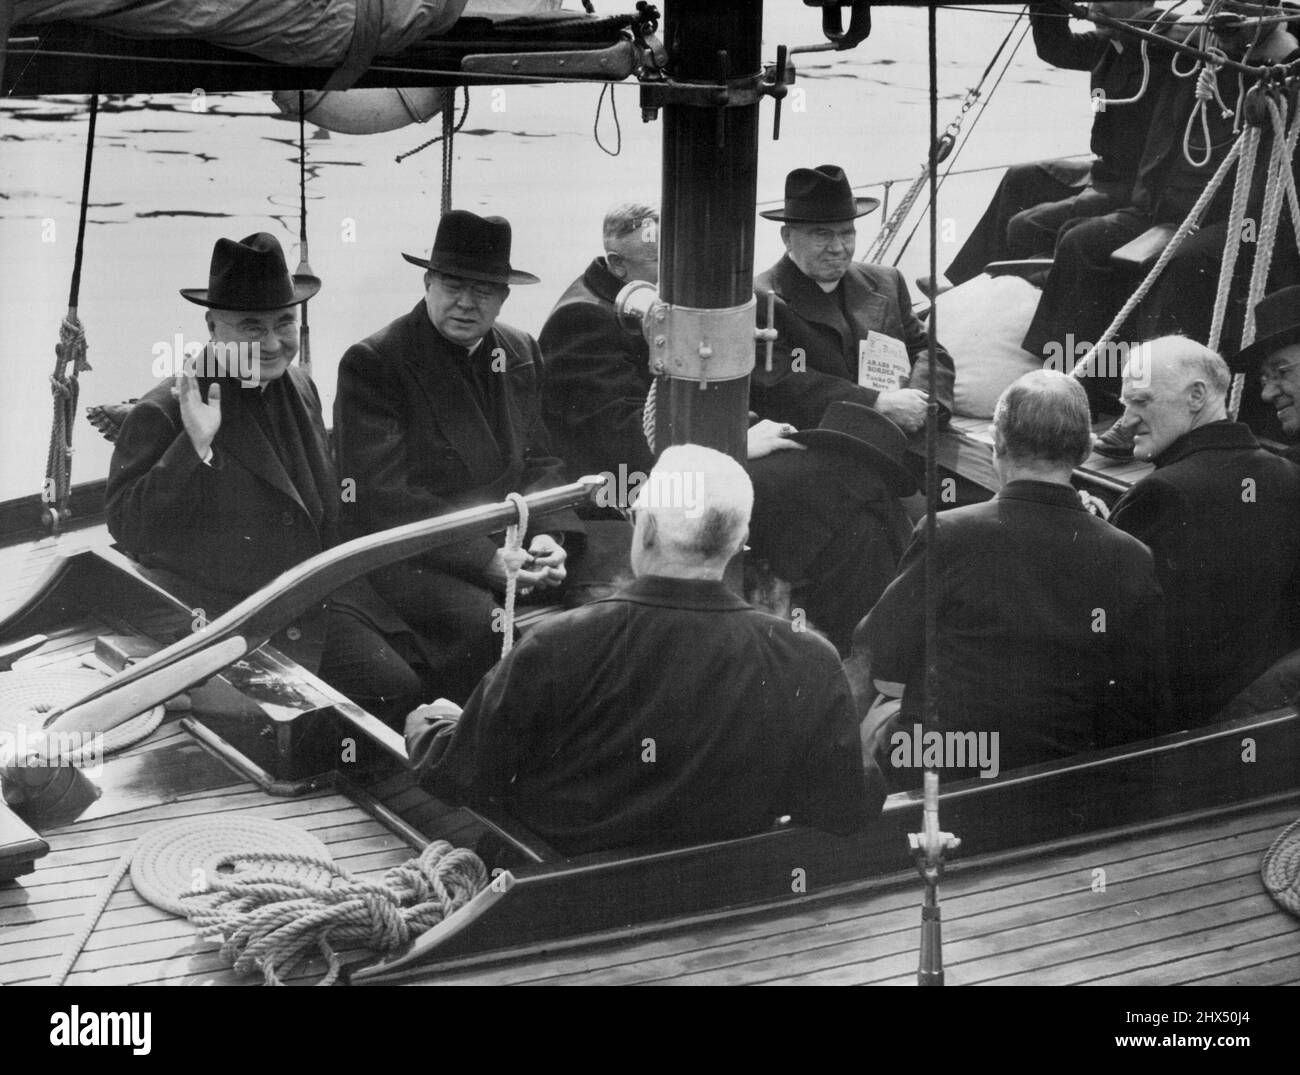 At left is Cardinal Spellman and other Catholic dignitaries, leaving Man-o-War Steps for a tour of the harbour on board Mr. Phil Goldstein's ketch Archina. April 29, 1948. (Photo by Frank Albert Charles Burke/Fairfax Media). Stock Photo